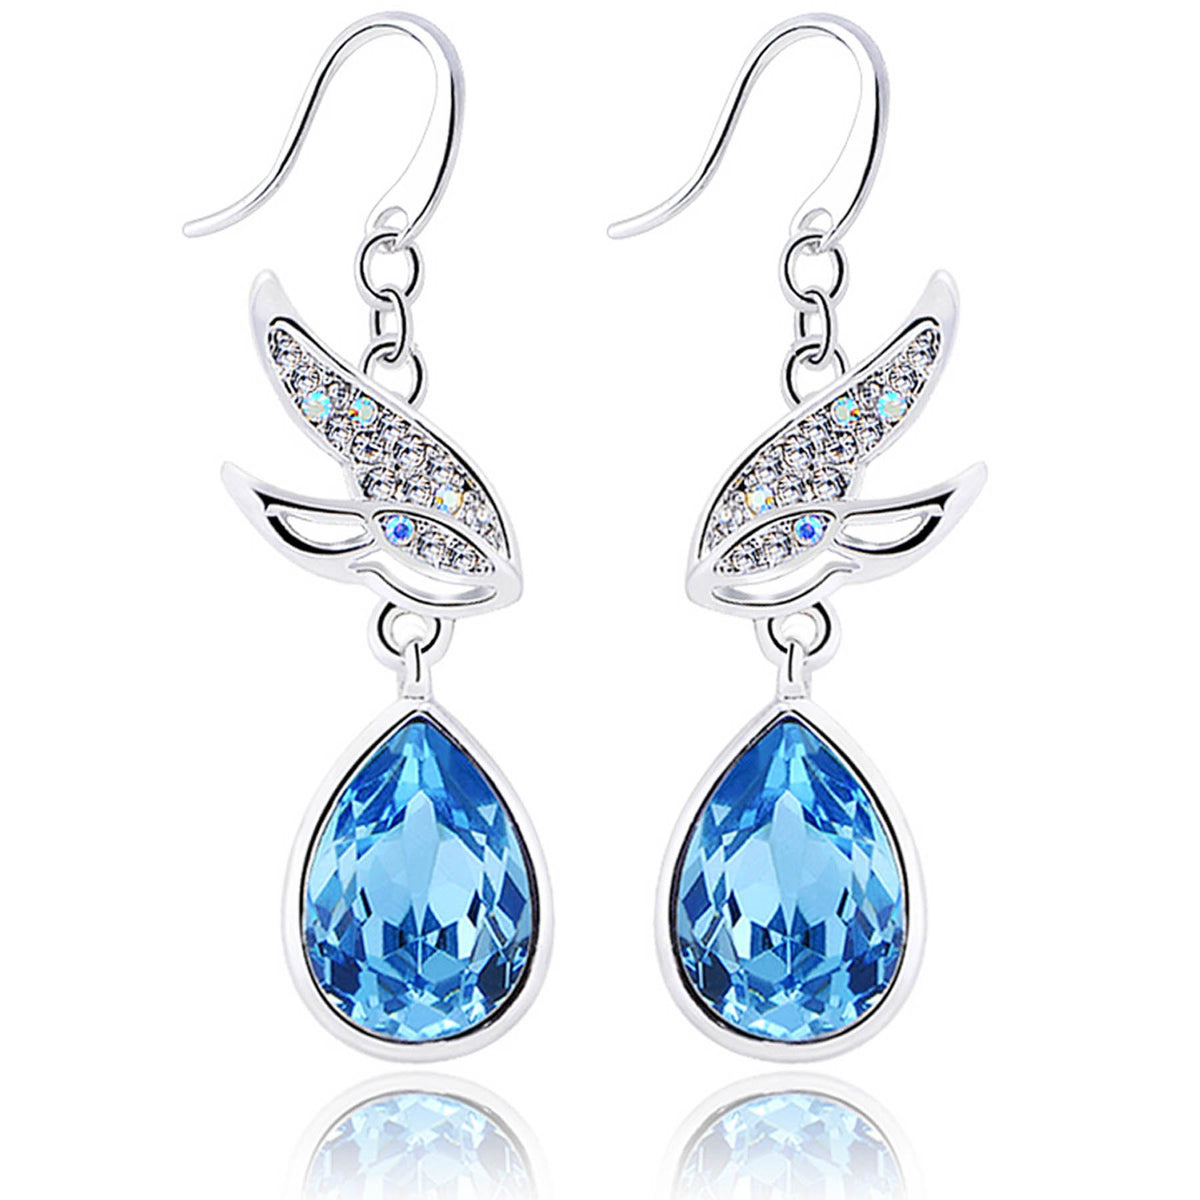 Yellow Chimes Crystals from Swarovski Flying Birds Blue Earrings For Women and Girls